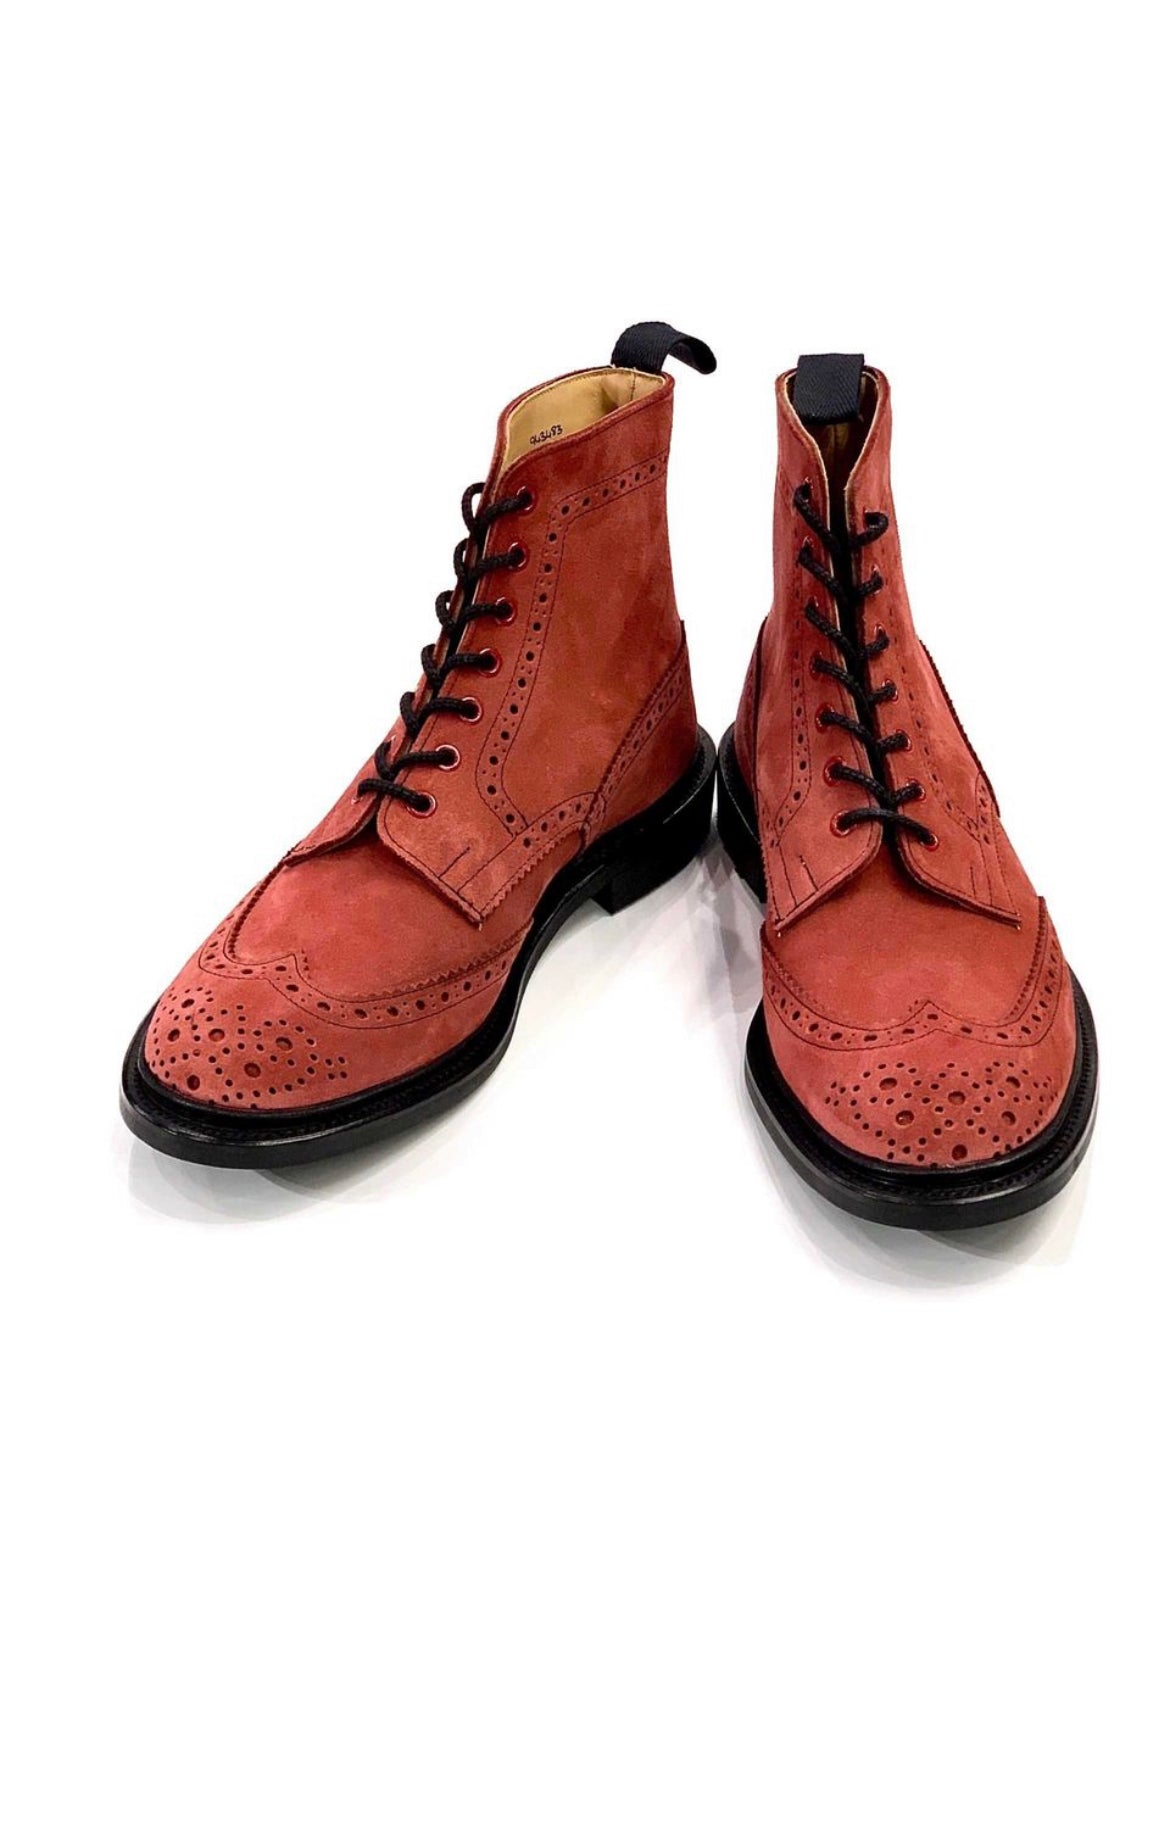 TKS STOW Dainite Sole Red Ox Reserve Suede